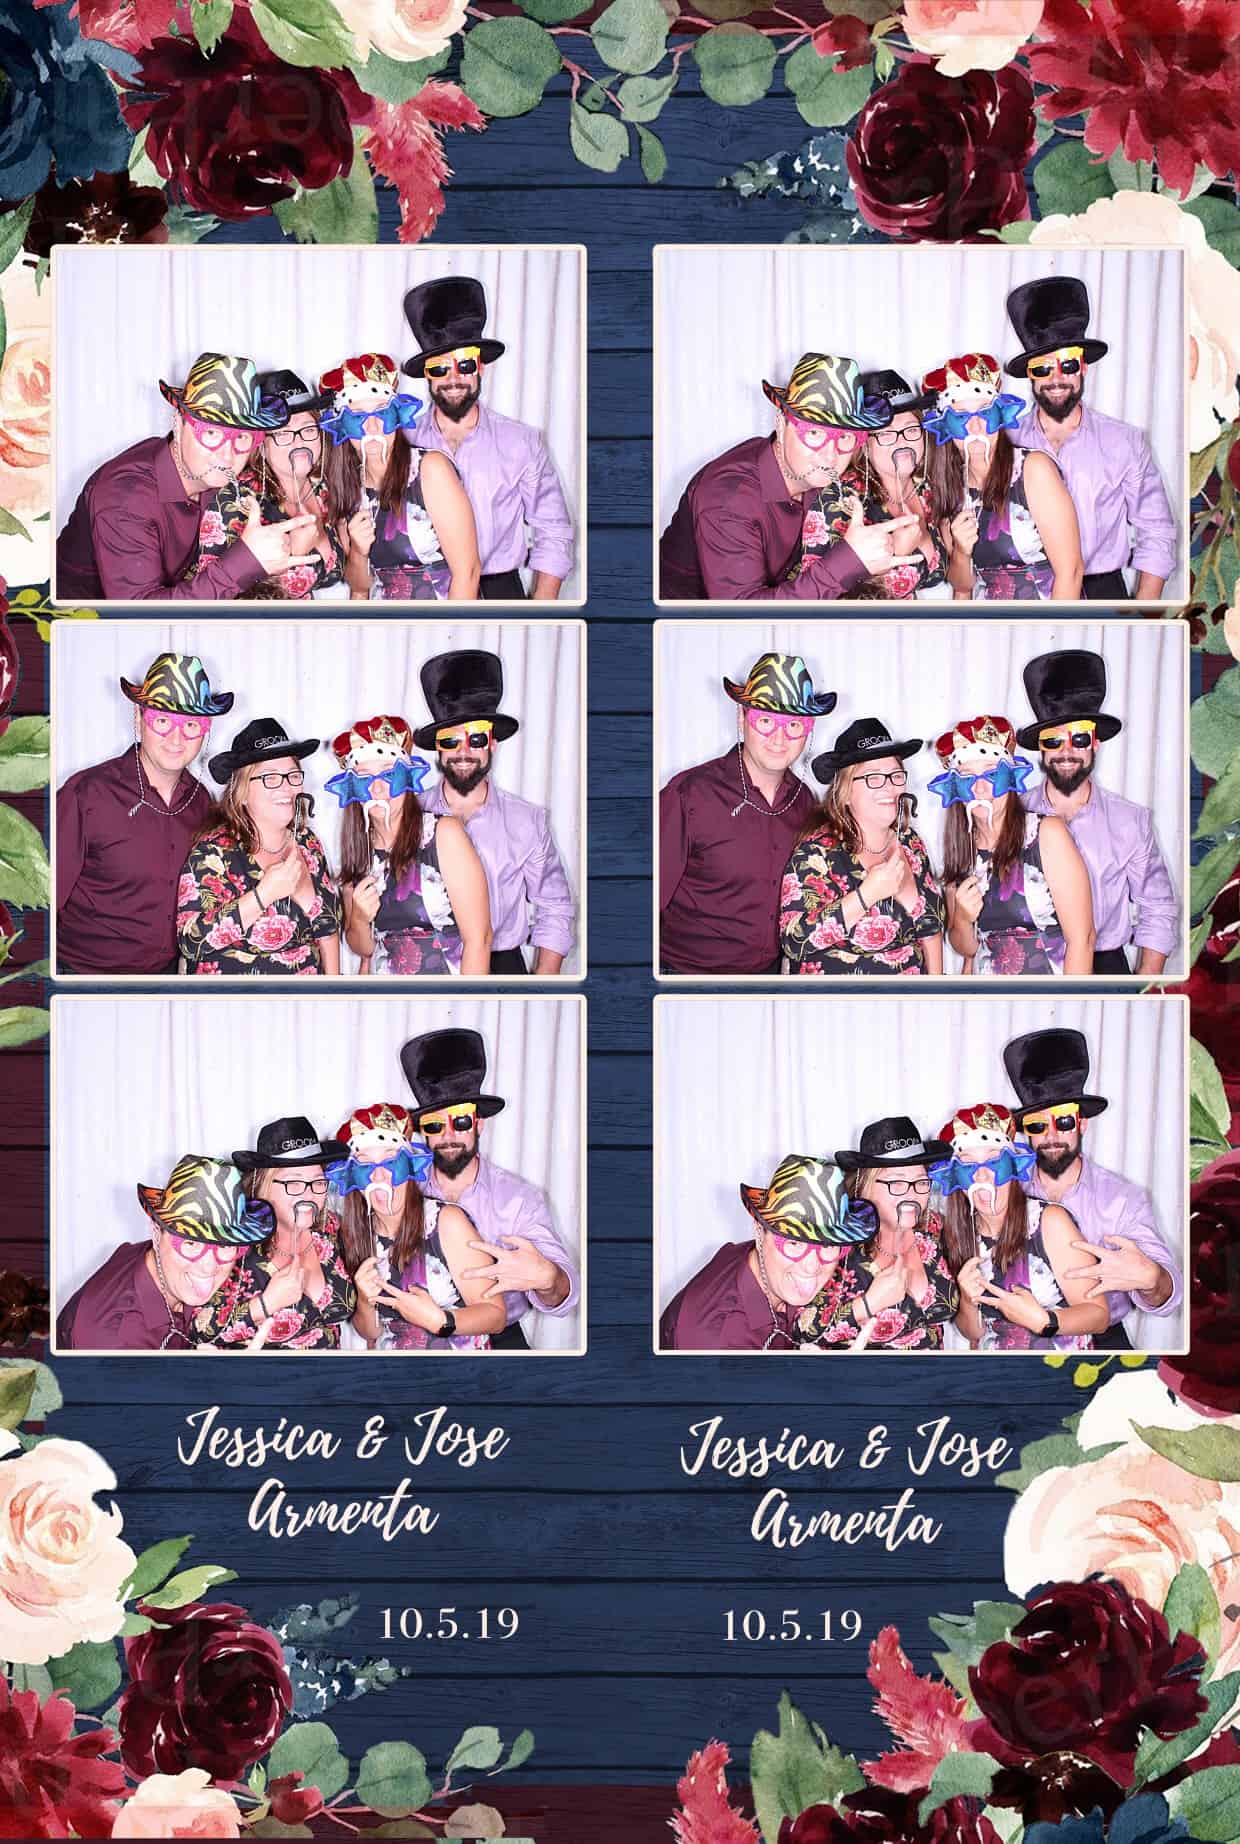 photo booth rental and photobooth packages snapshot photos (11)